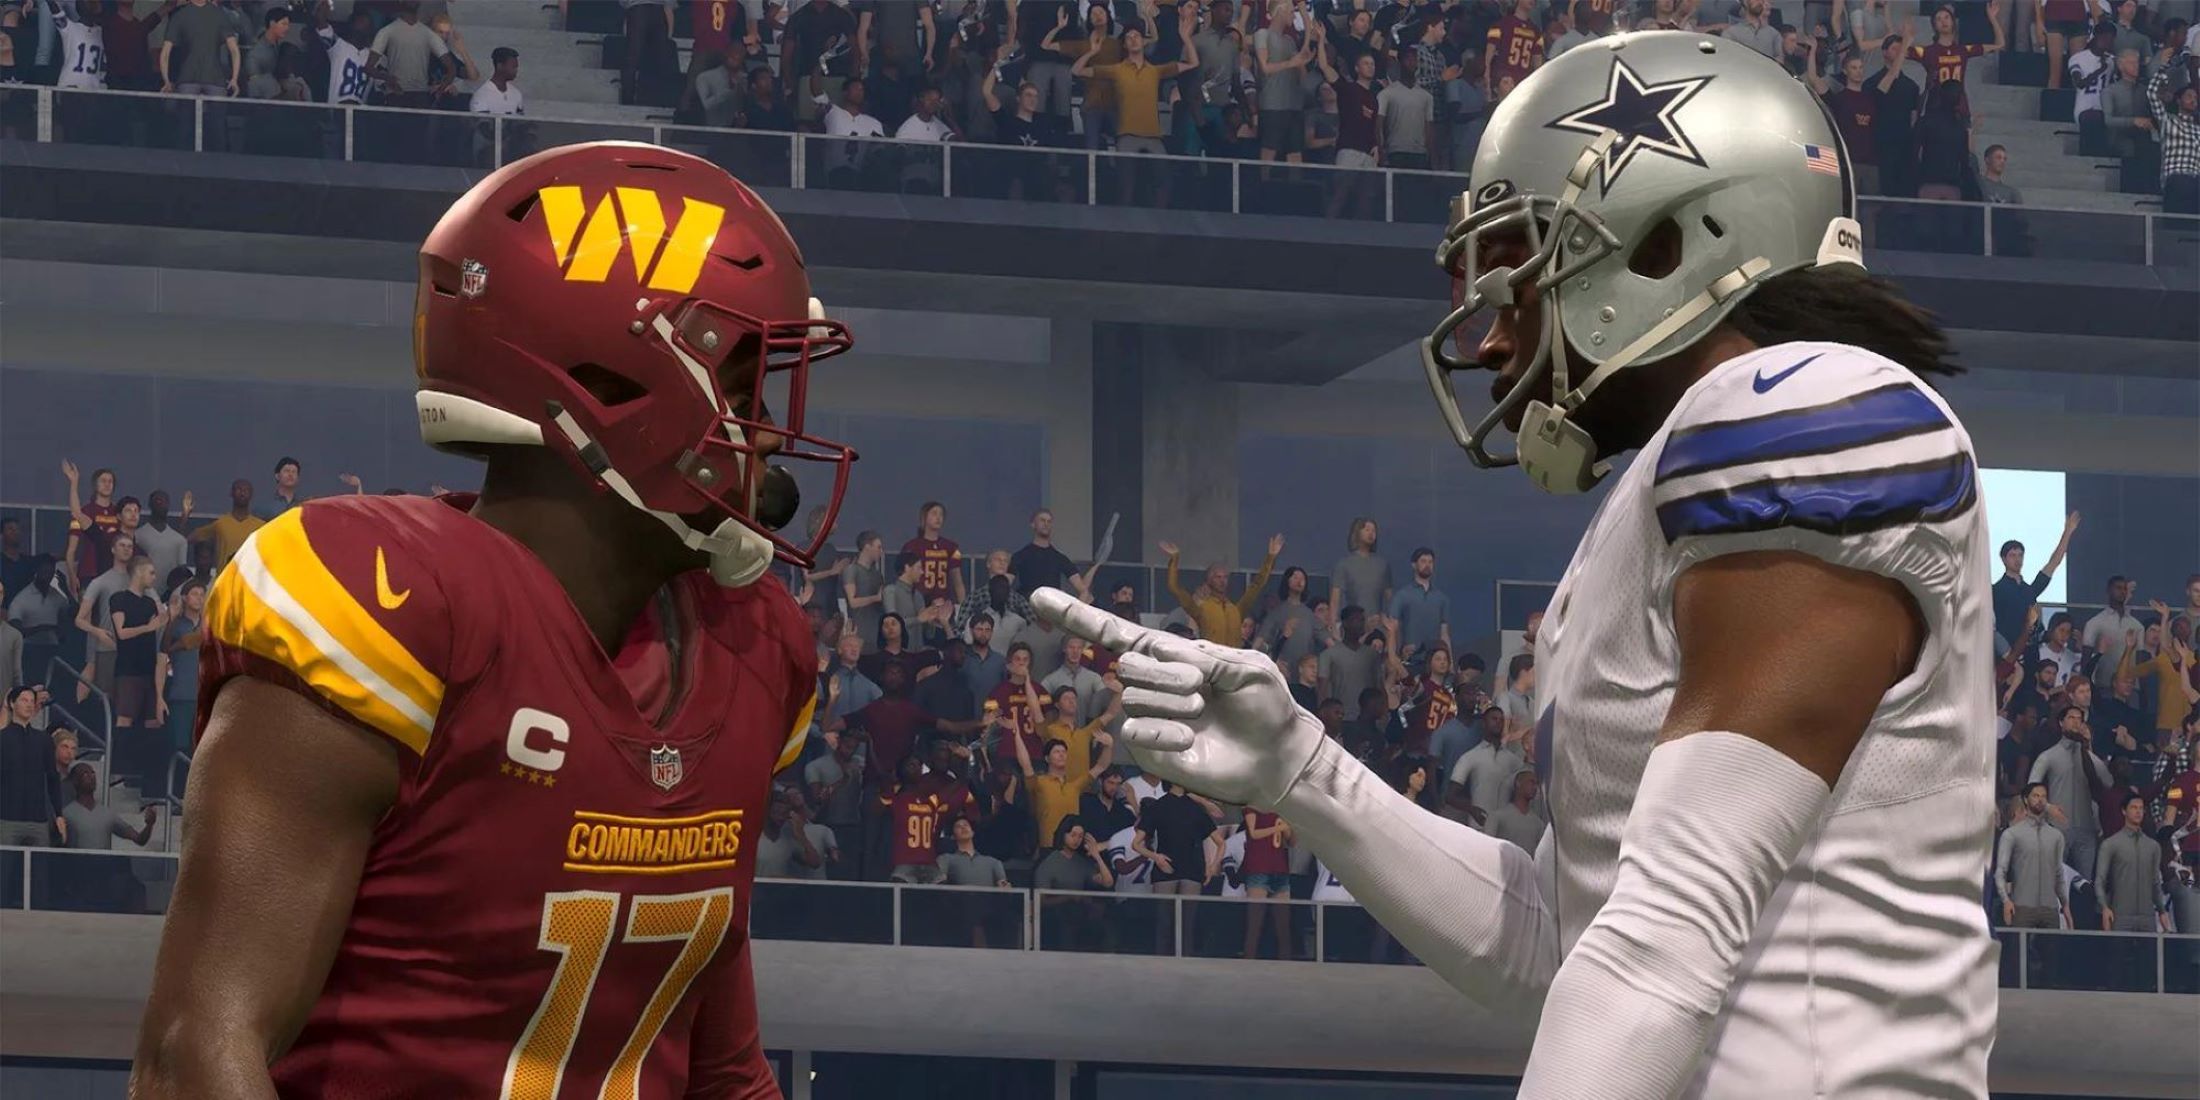 madden nfl 24 argument between cowboys and commanders players